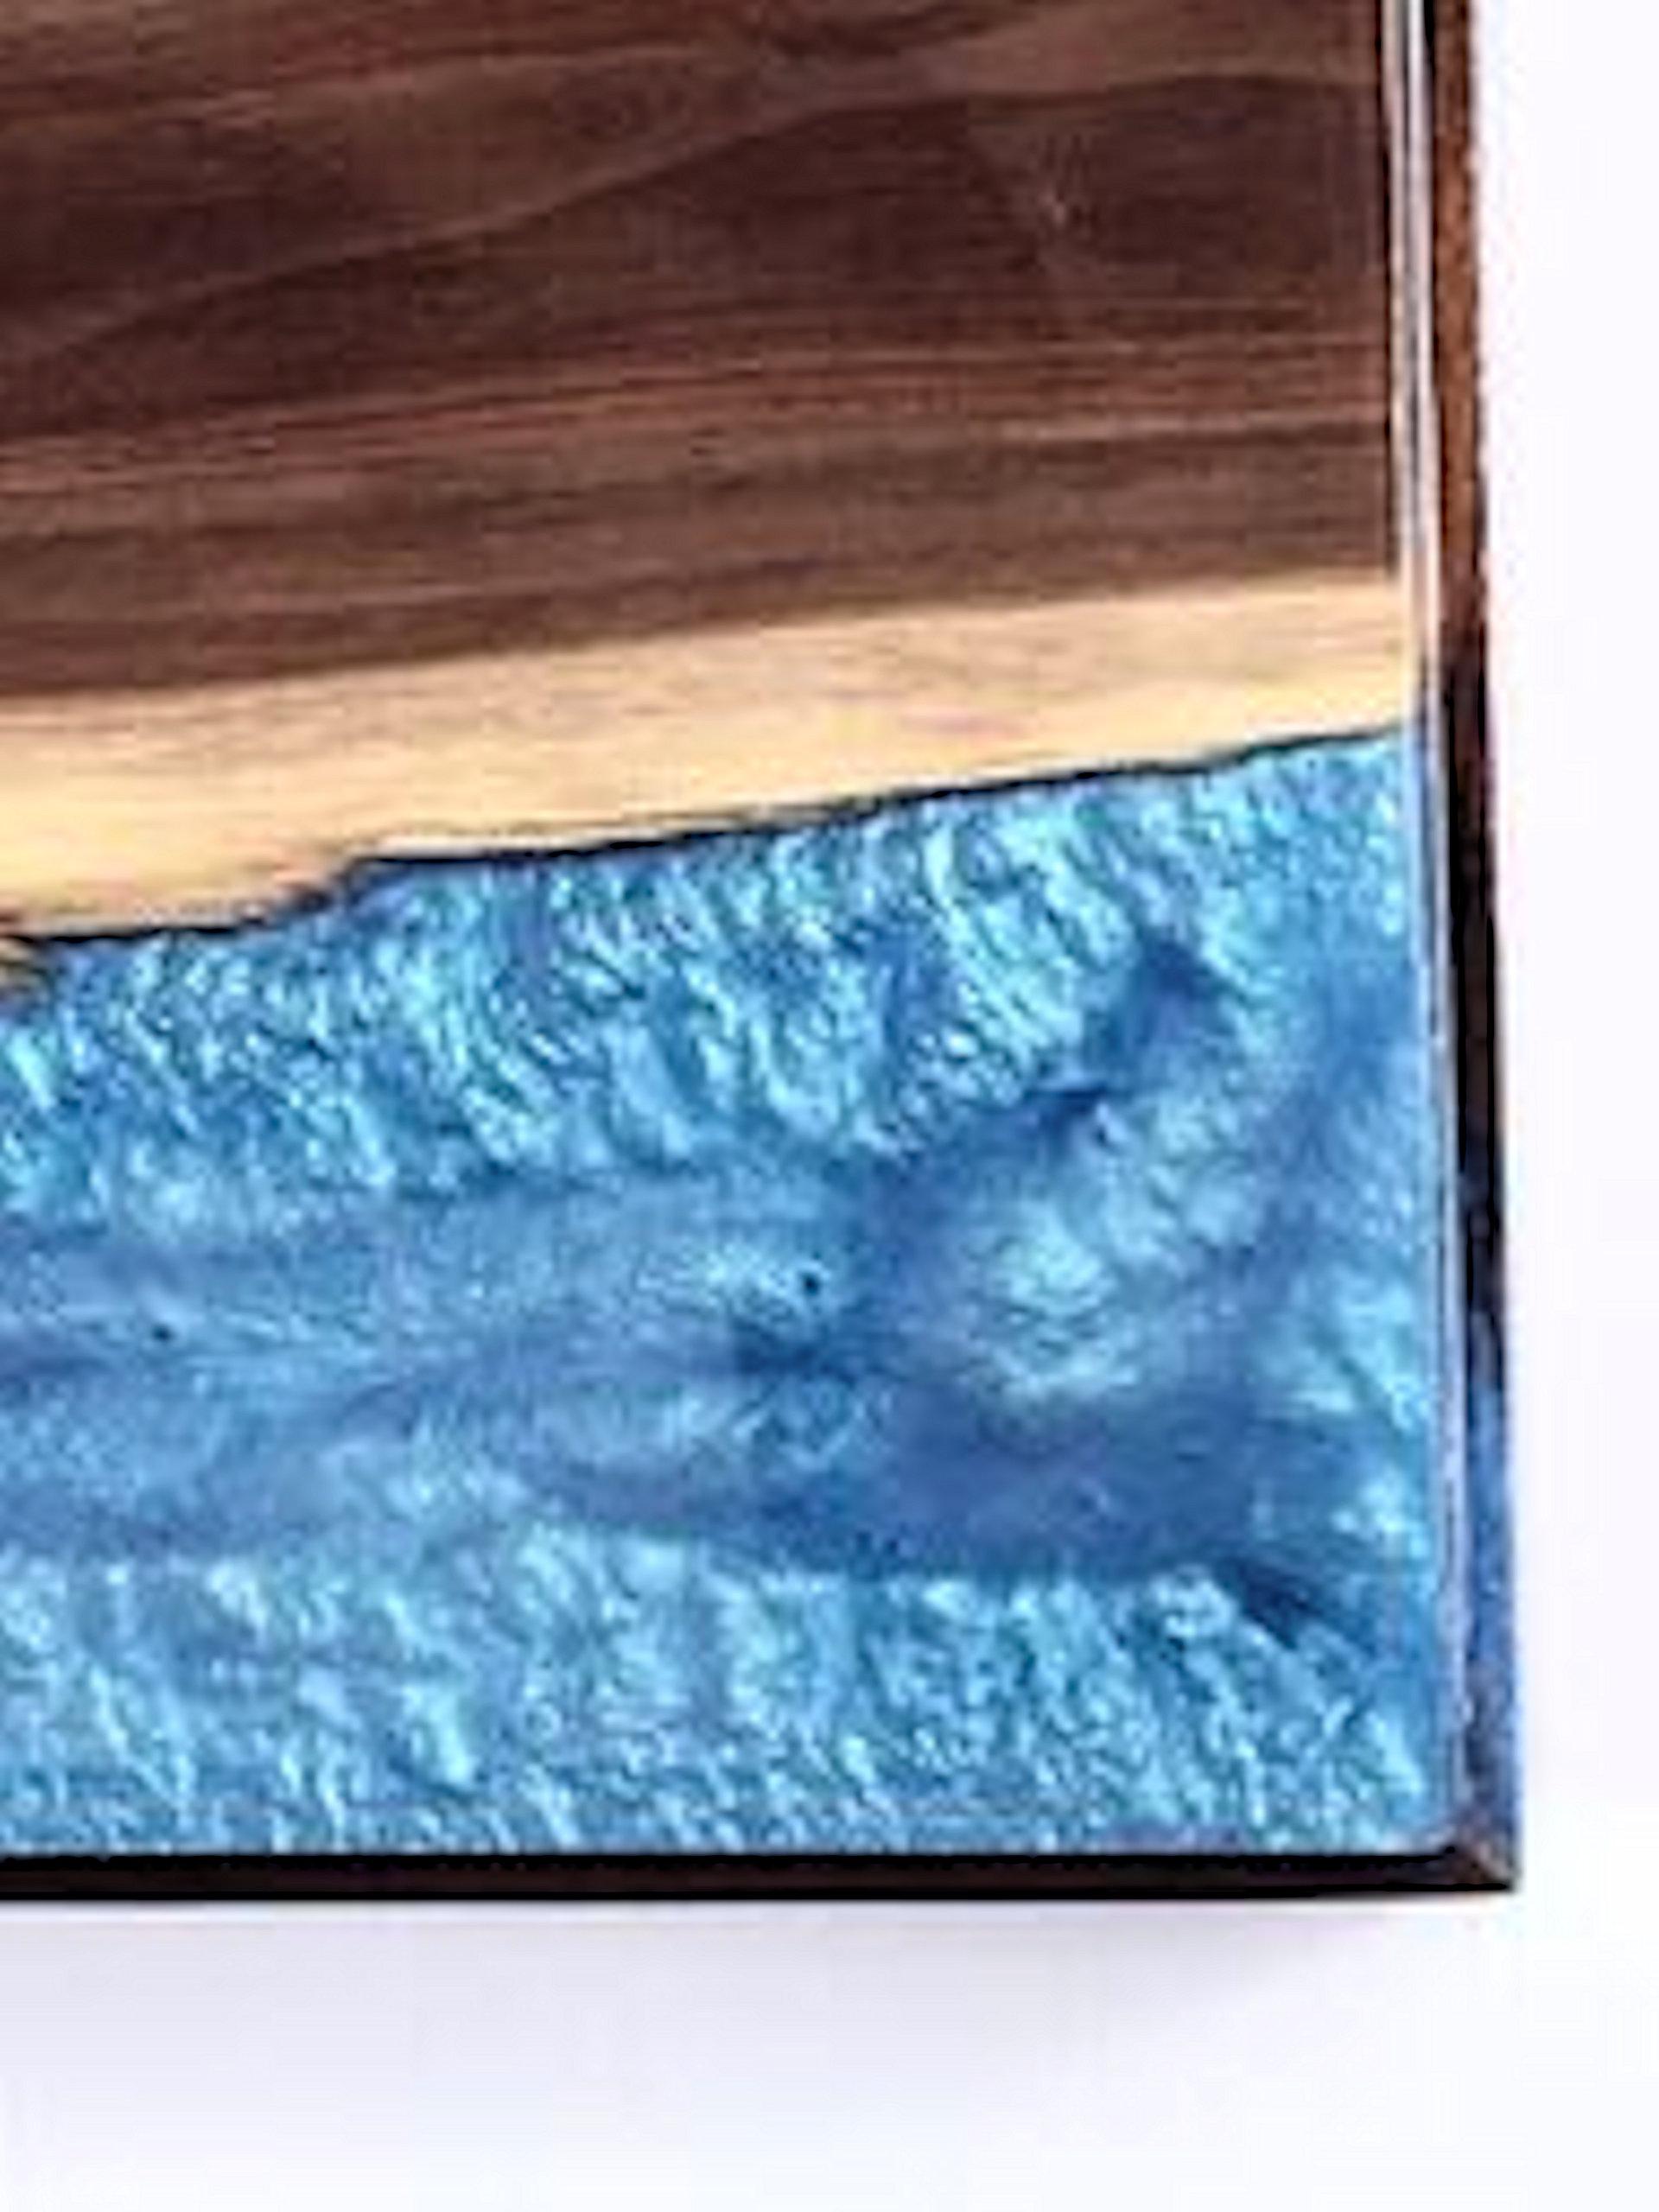 Title: Lightning
Description: Black walnut mixed with blue epoxy inlay. When back-lit, epoxy comes alive and resembles lightning. This piece hangs horizontally or vertically.

About the Artist:
Jeff Linenkugel was born and raised in Toledo Ohio and